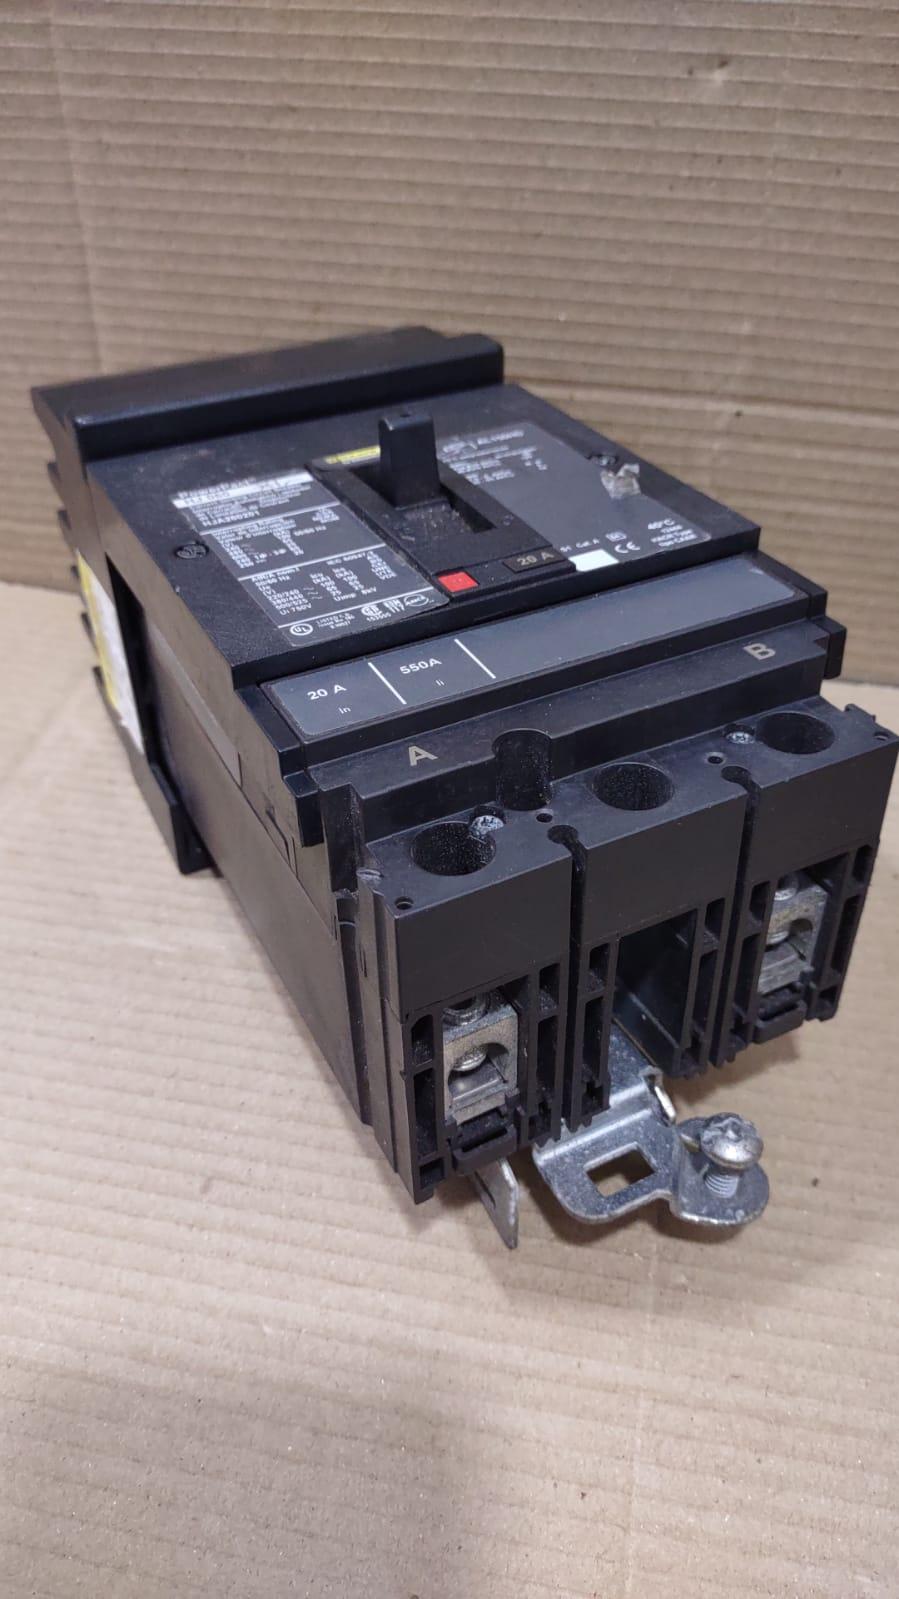 Square D Power Pact HJ 060 Current Limiting Circuit Breaker 20A HJA260201